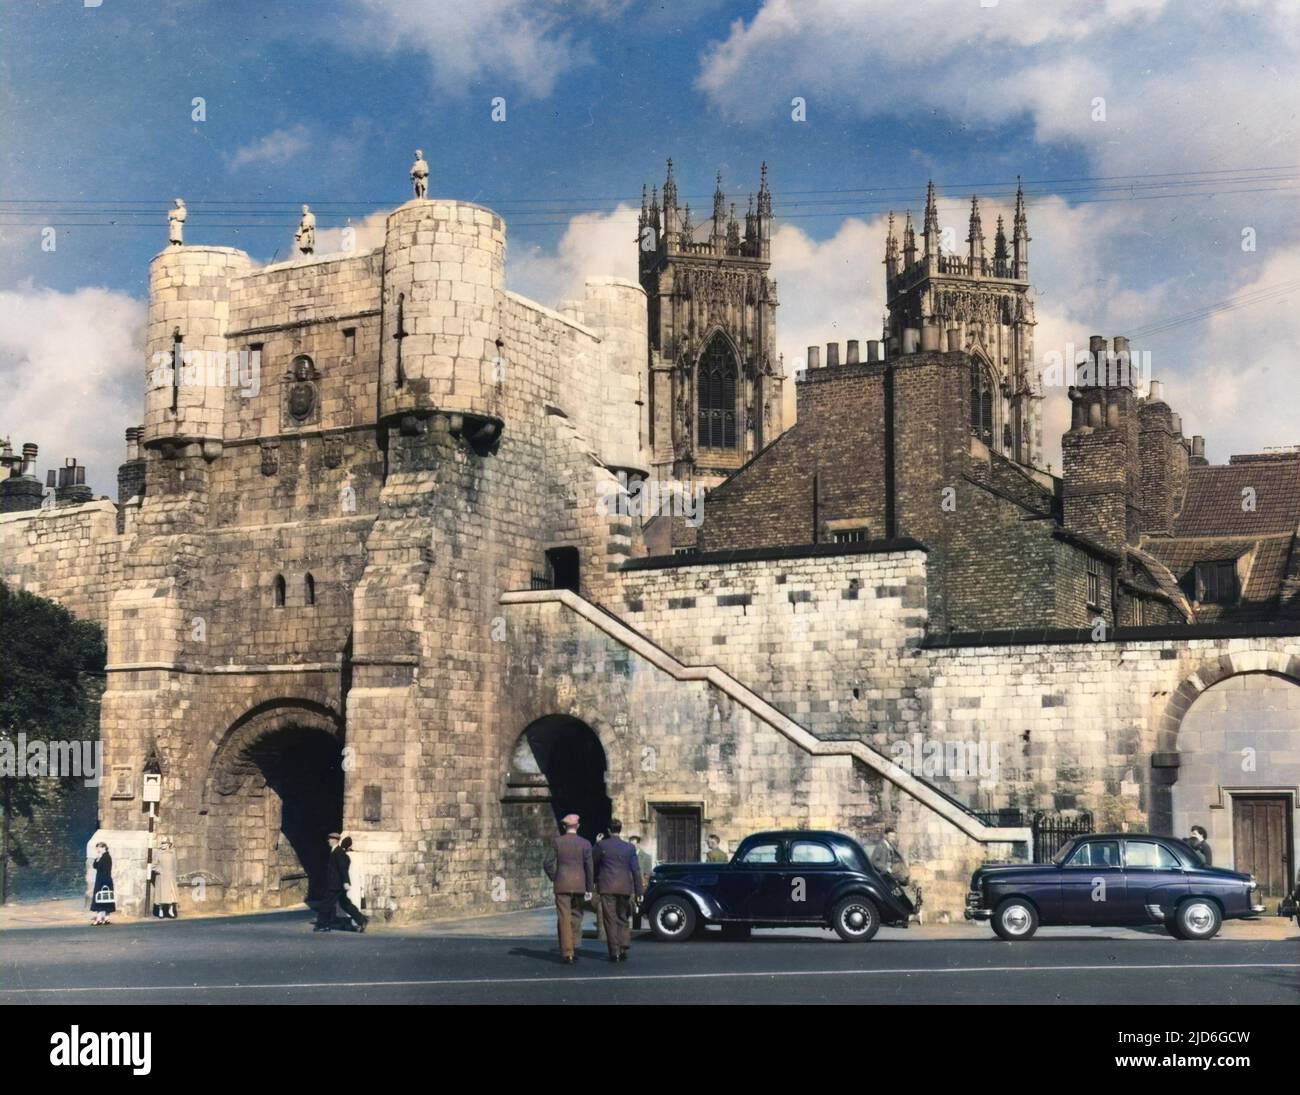 Bootham Bar, the old West Gate to the City of York, Yorkshire, England. Colourised version of : 10173393       Date: 1950s Stock Photo